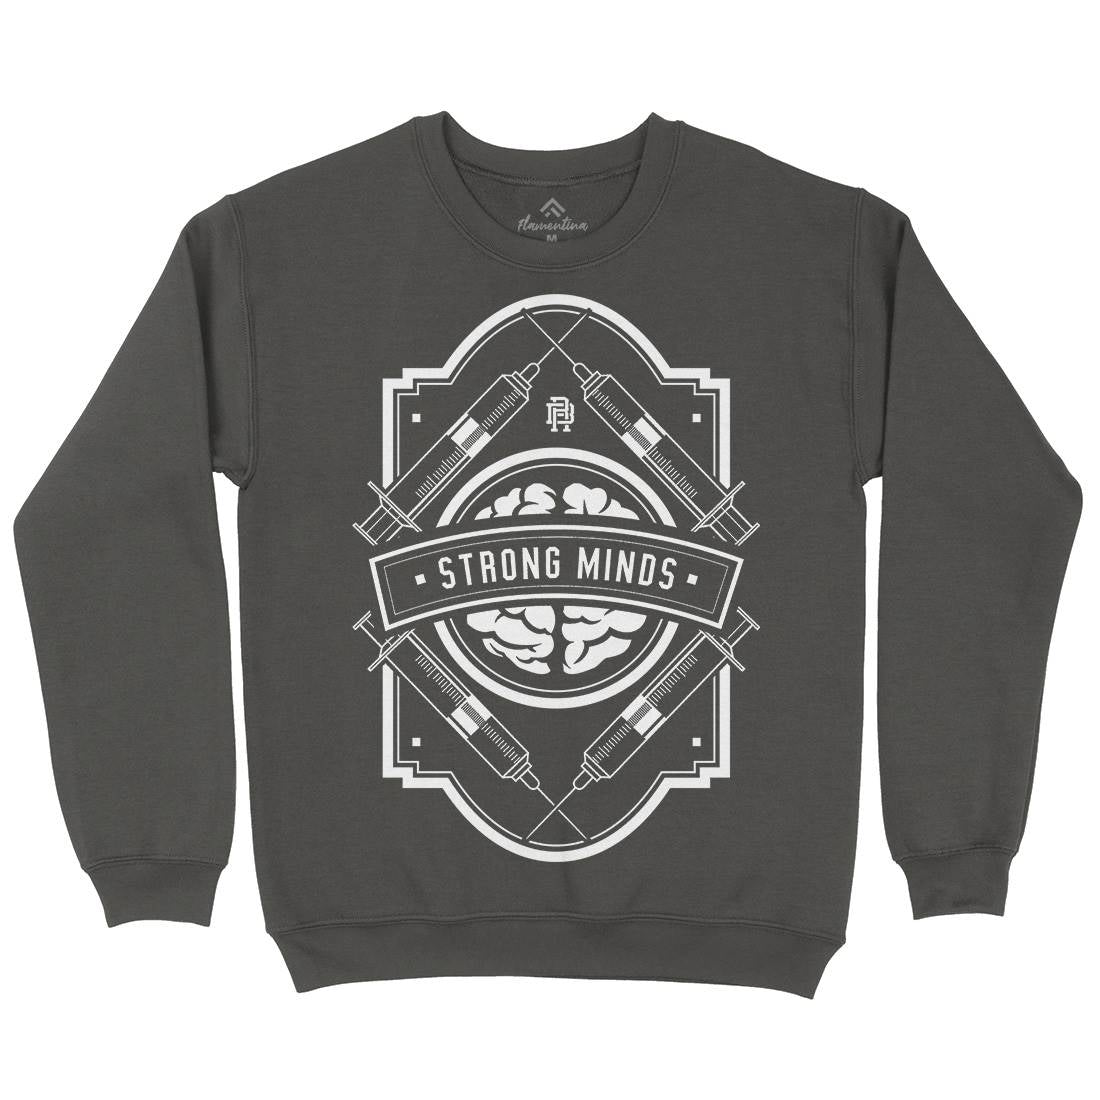 Strong Minds Kids Crew Neck Sweatshirt Quotes A288